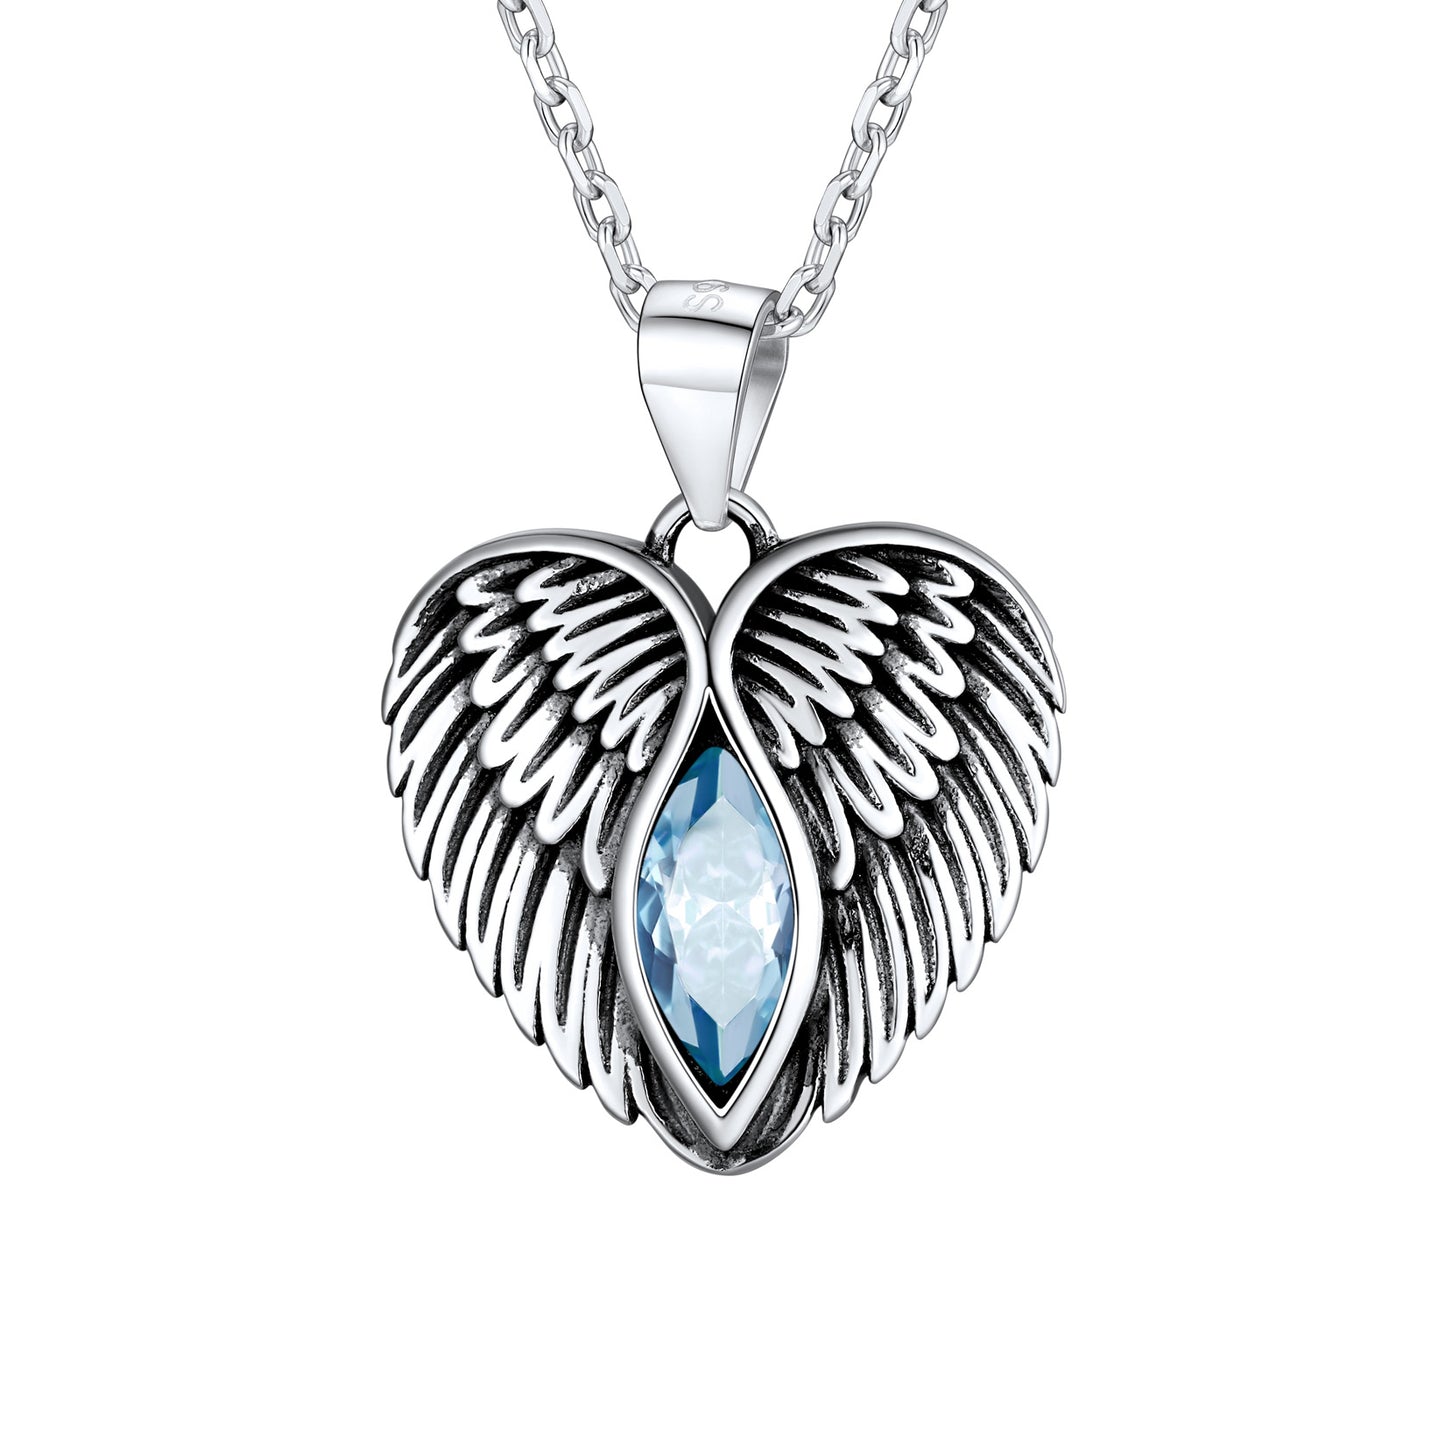 JewelrySupply Angel Wing Heart Charm 20x18mm Pewter Antique Silver Plated (1-Pc)